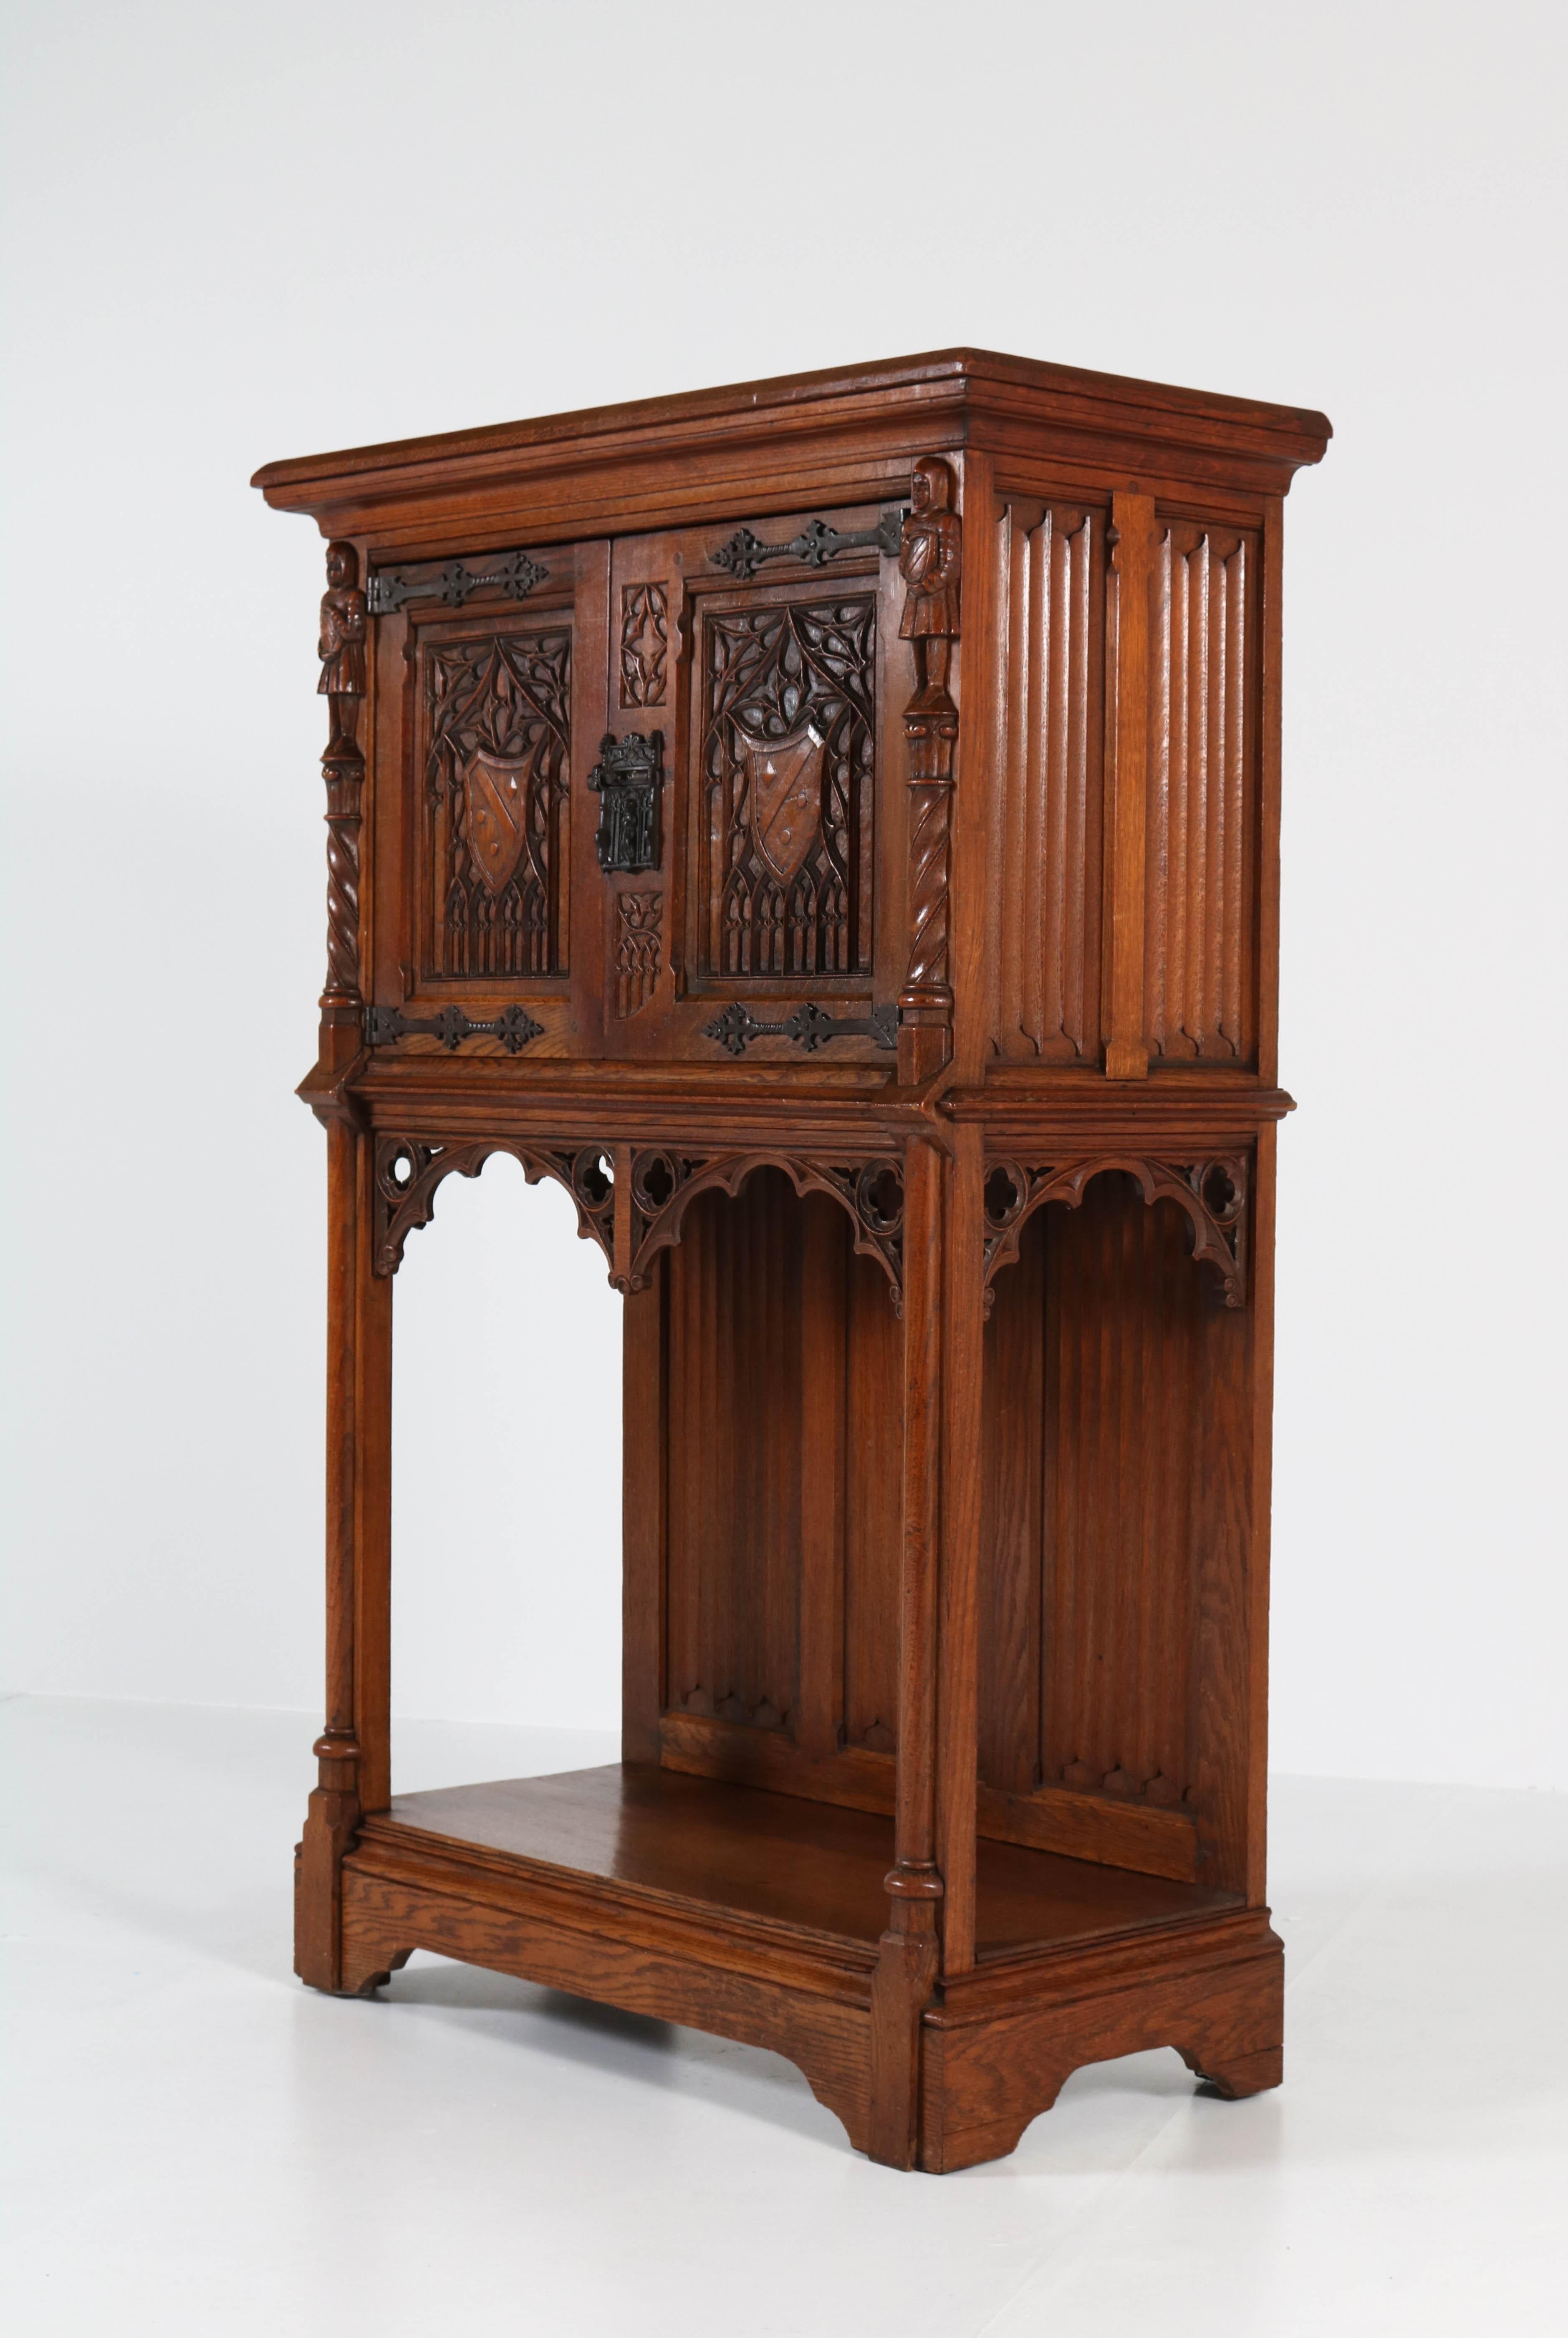 Offered by Amsterdam Modernism:
Dutch Neo Gothic cabinet with carved knights, 1930s.
Solid oak with original lock.
In good original condition with minor wear consistent with age and use,
preserving a beautiful patina.